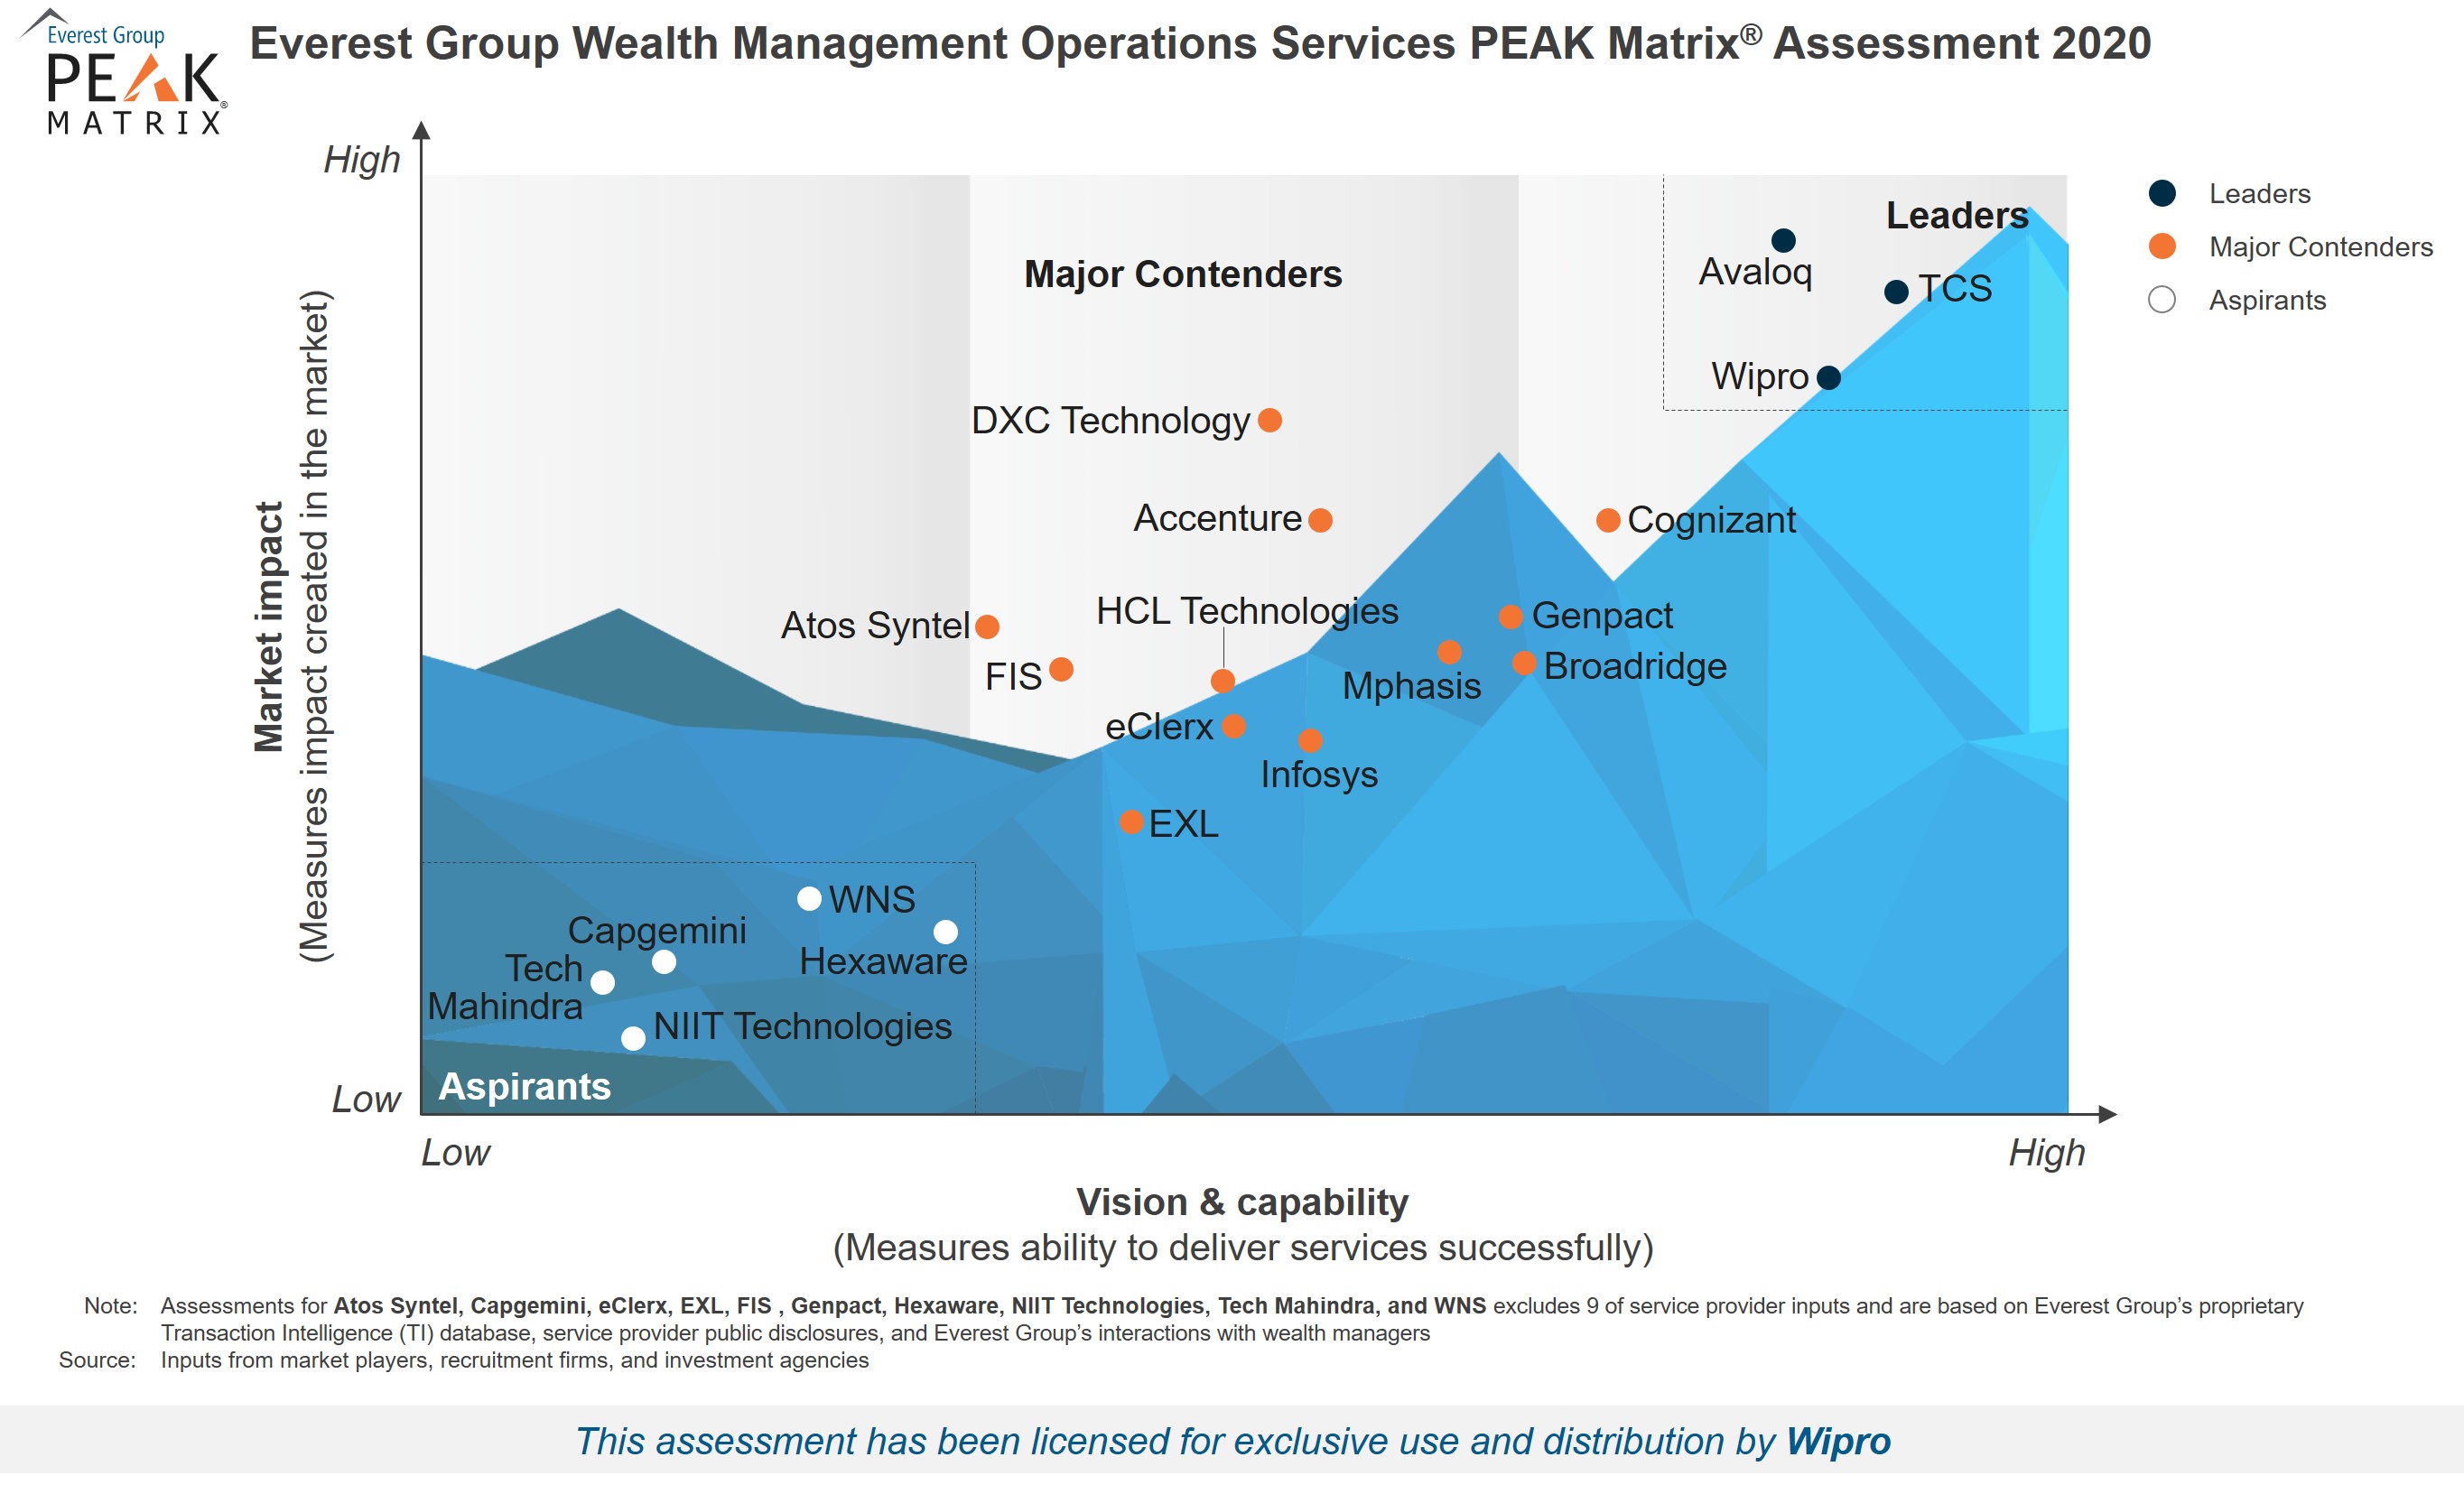 Wipro positioned as a Leader in Everest Group PEAK Matrix for Wealth Management Operations Service Providers 2020